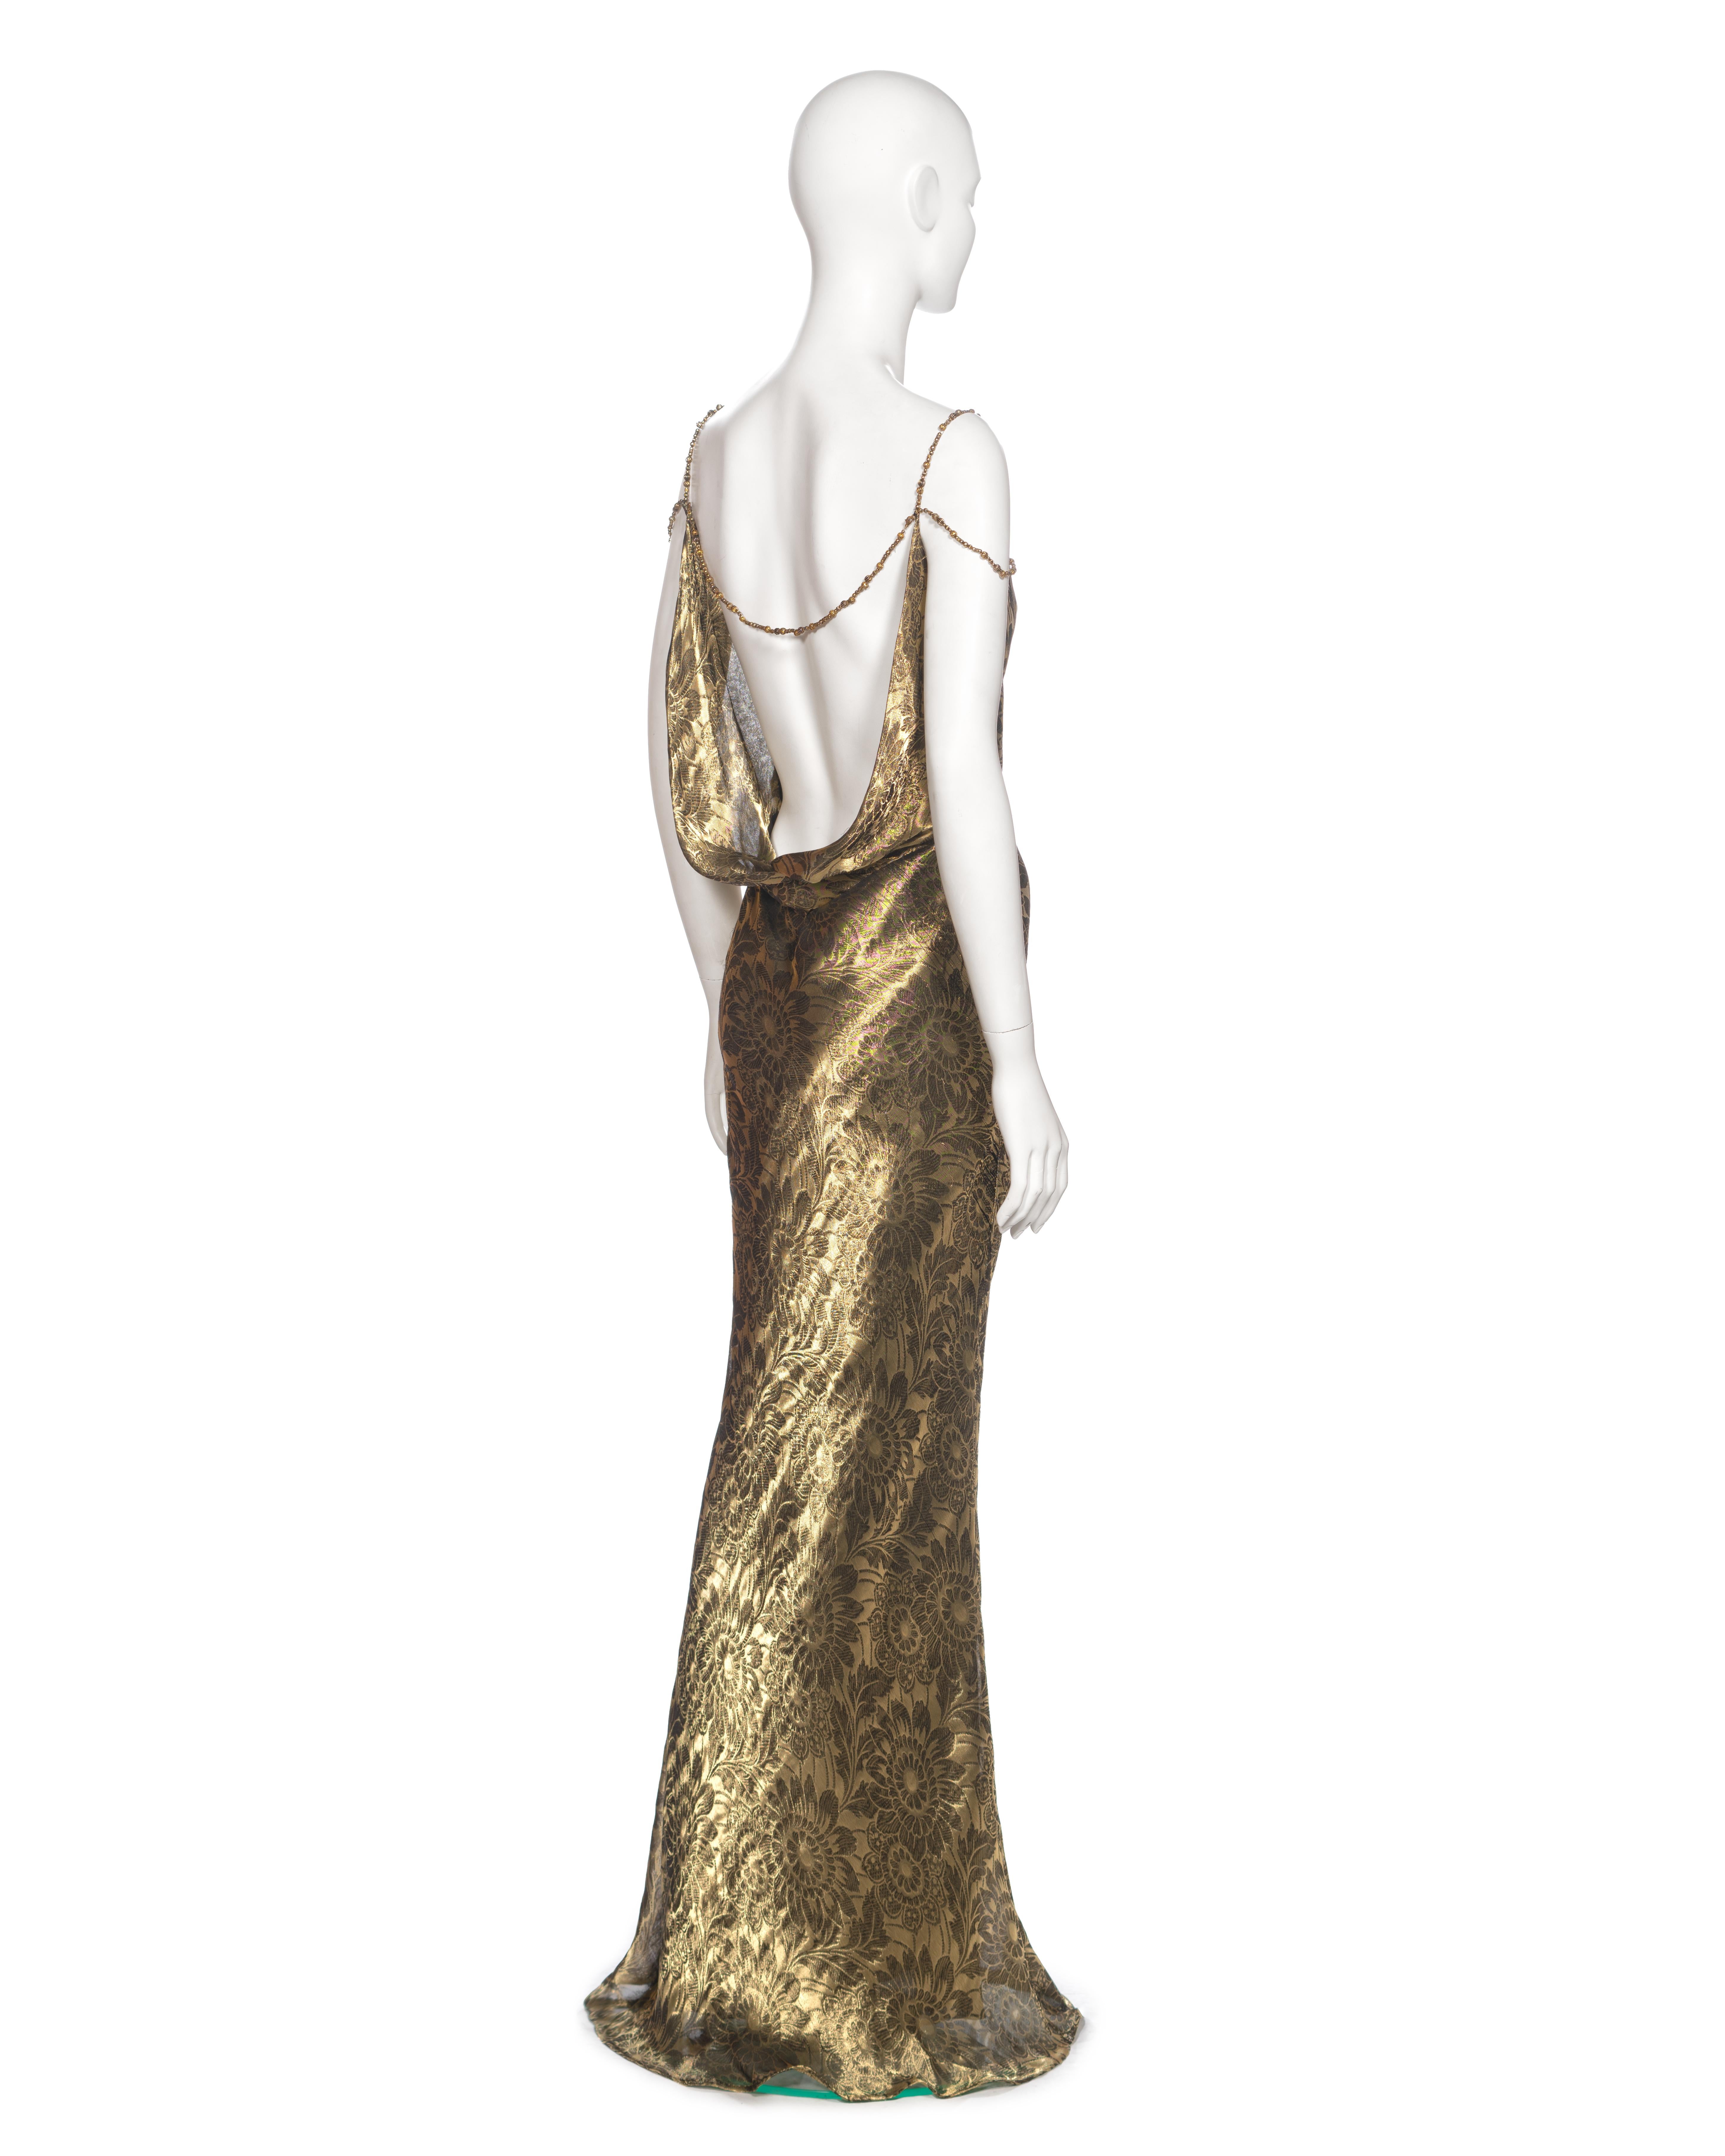 Christian Dior by John Galliano Metallic Antique Gold Evening Dress, FW 1998 For Sale 5